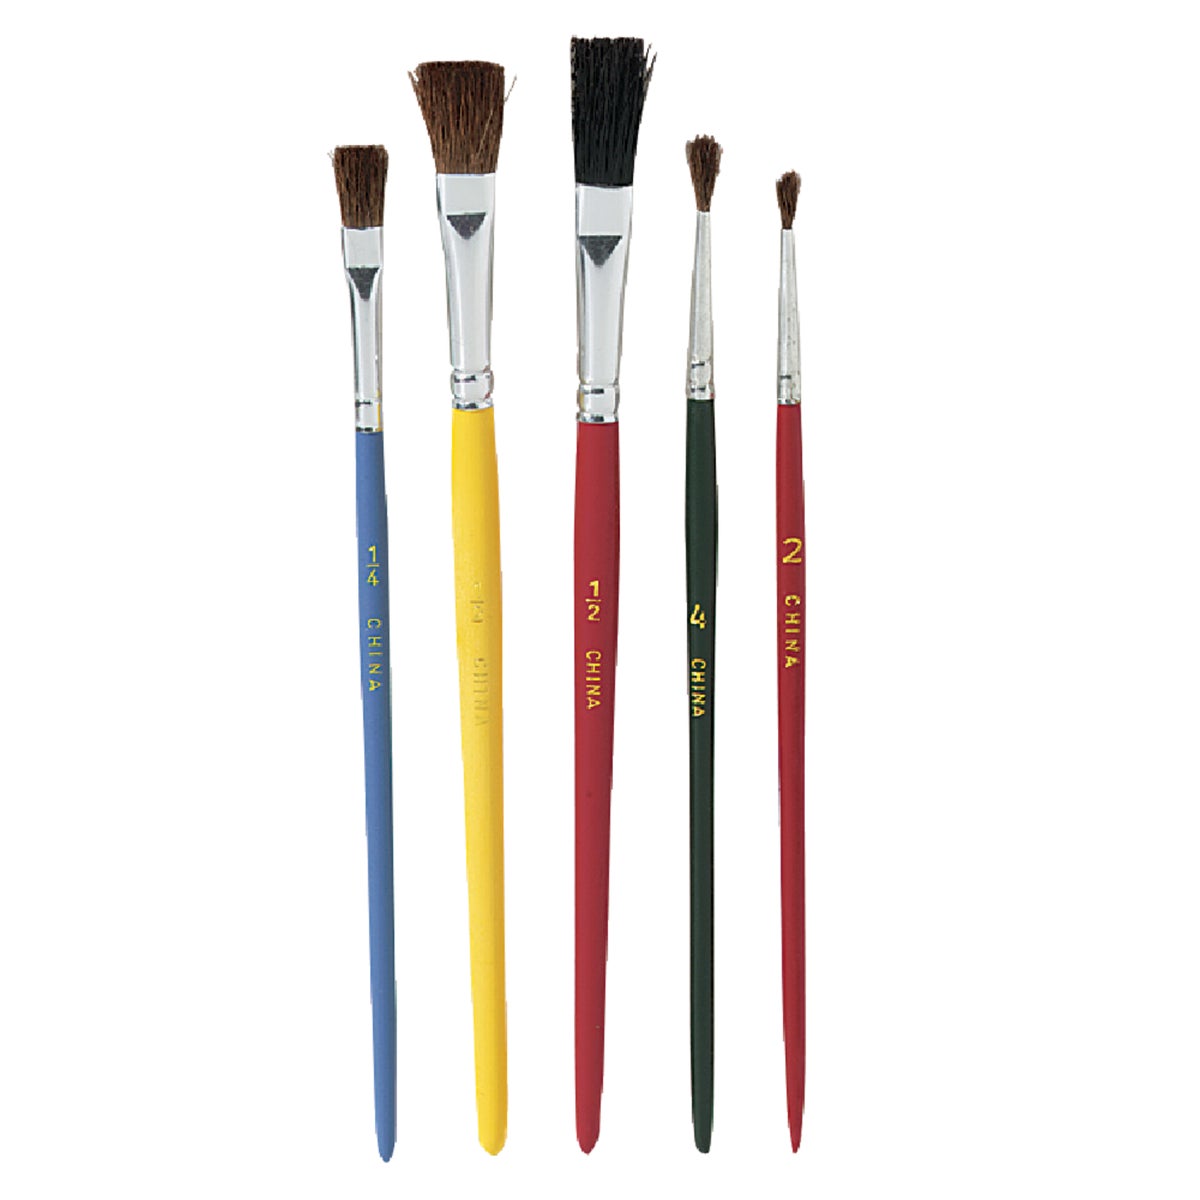 Duro Assorted Sizes And Assorted Bristle Material Artist Brush Set (5 Pieces)